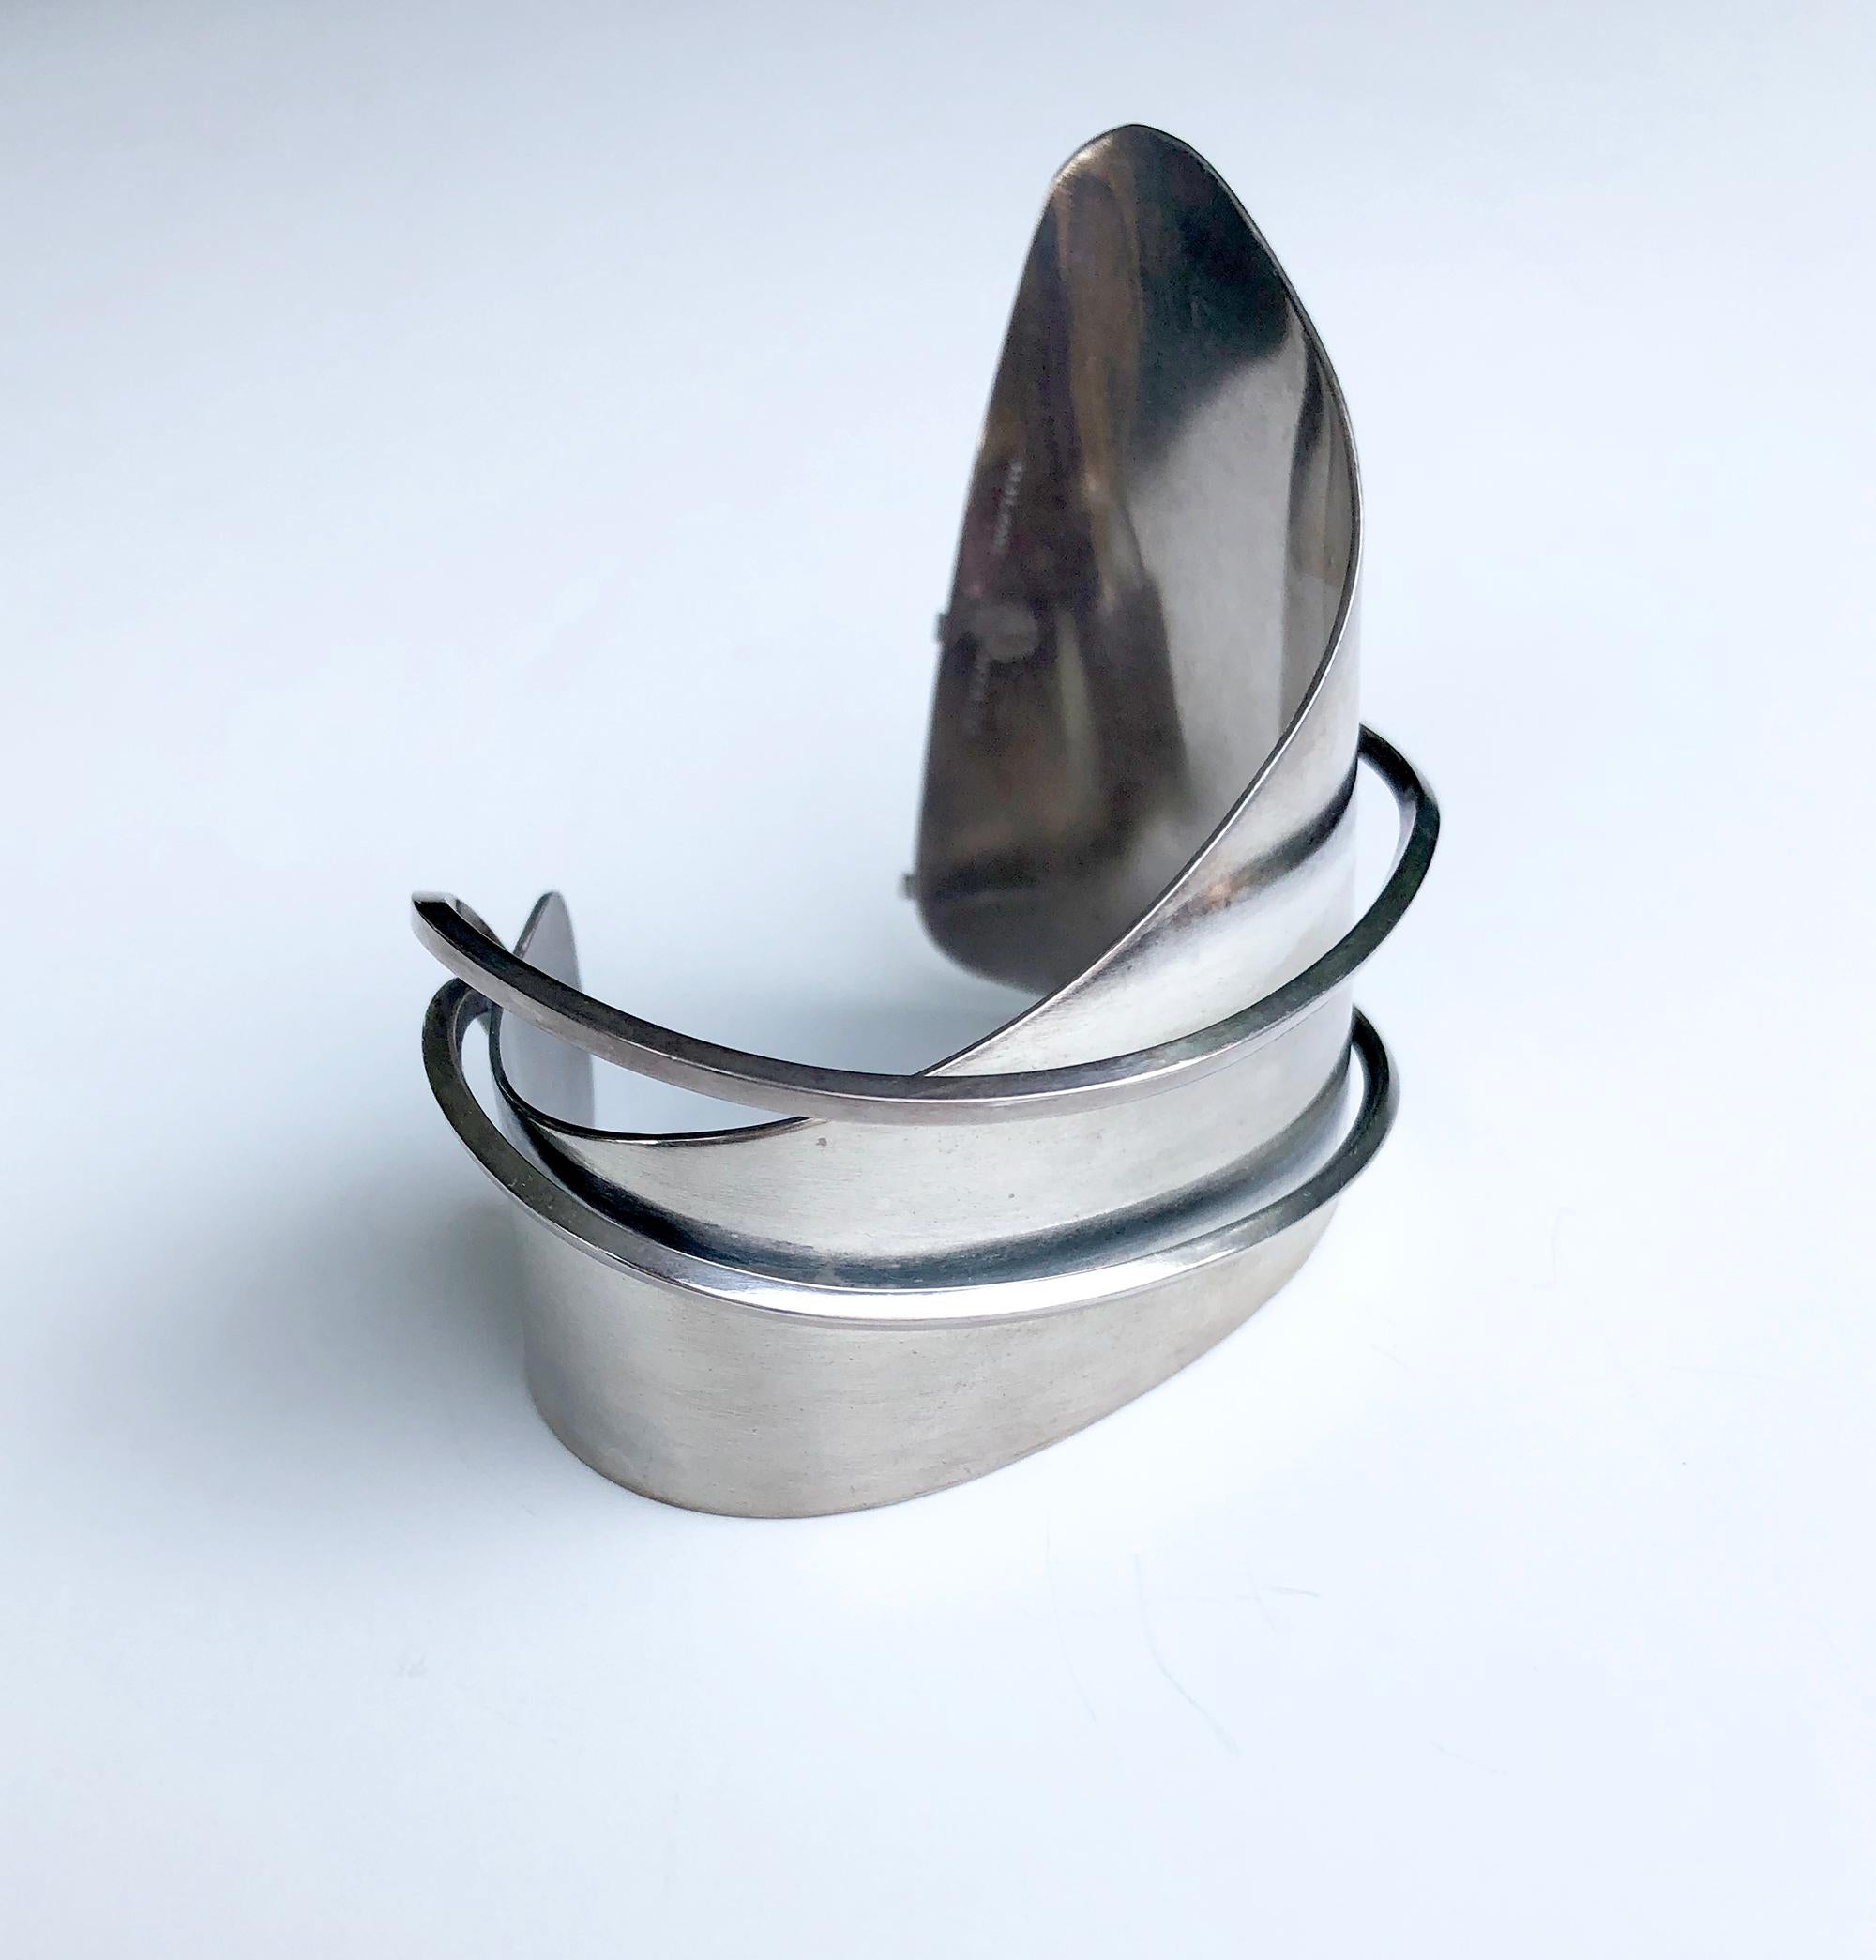 Large scale modernist hand wrought sterling silver cuff bracelet created by Ella L. Cone of Boston.  Cuff bracelet has a 6.75' to 7